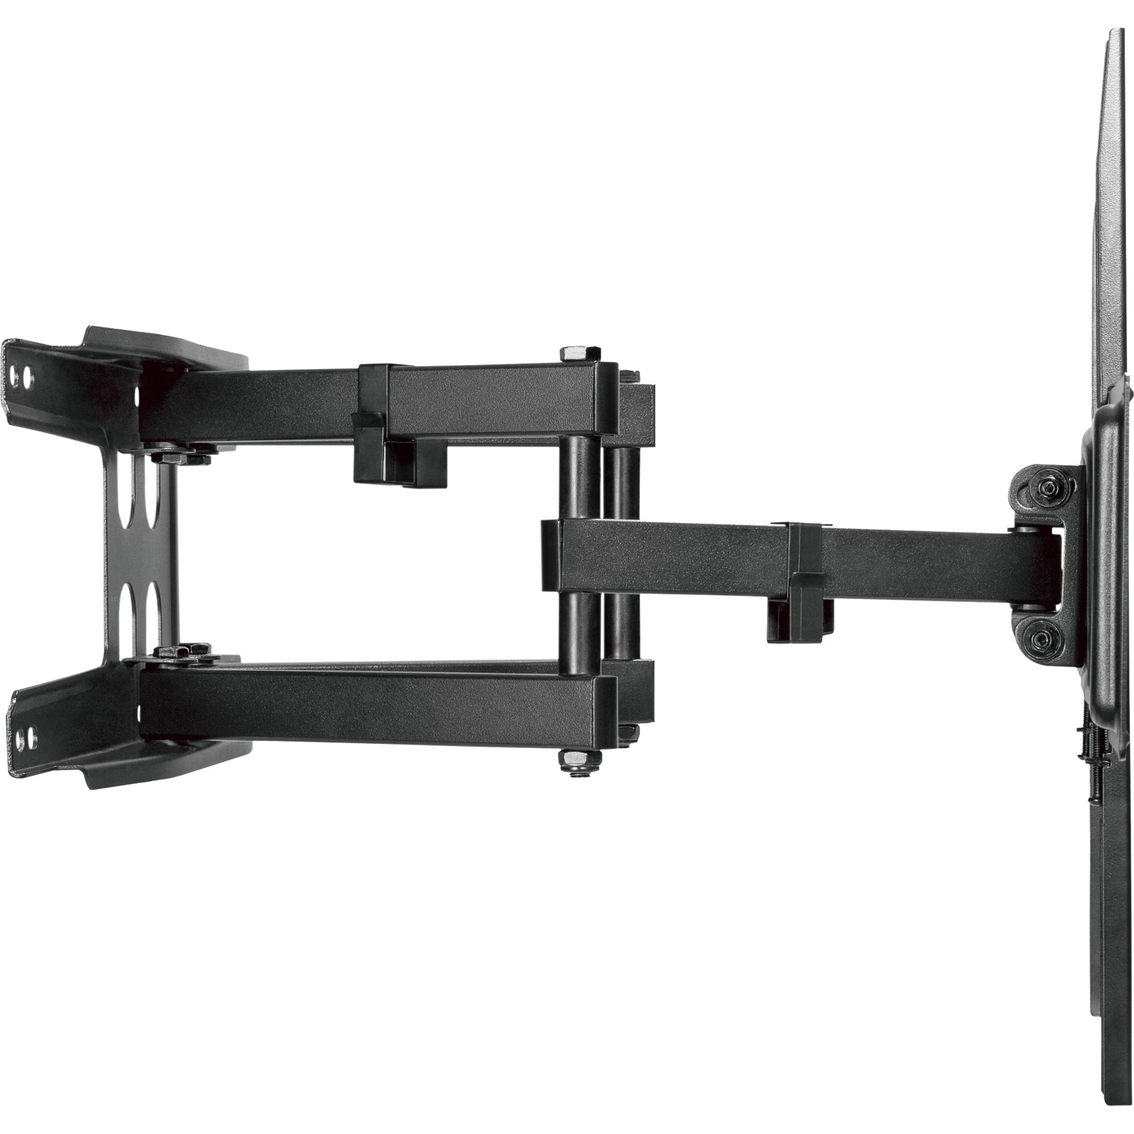 Promounts Articulating Wall Mount For 37 - 80 in. Screens Holds Up To 88 lb. - Image 5 of 9